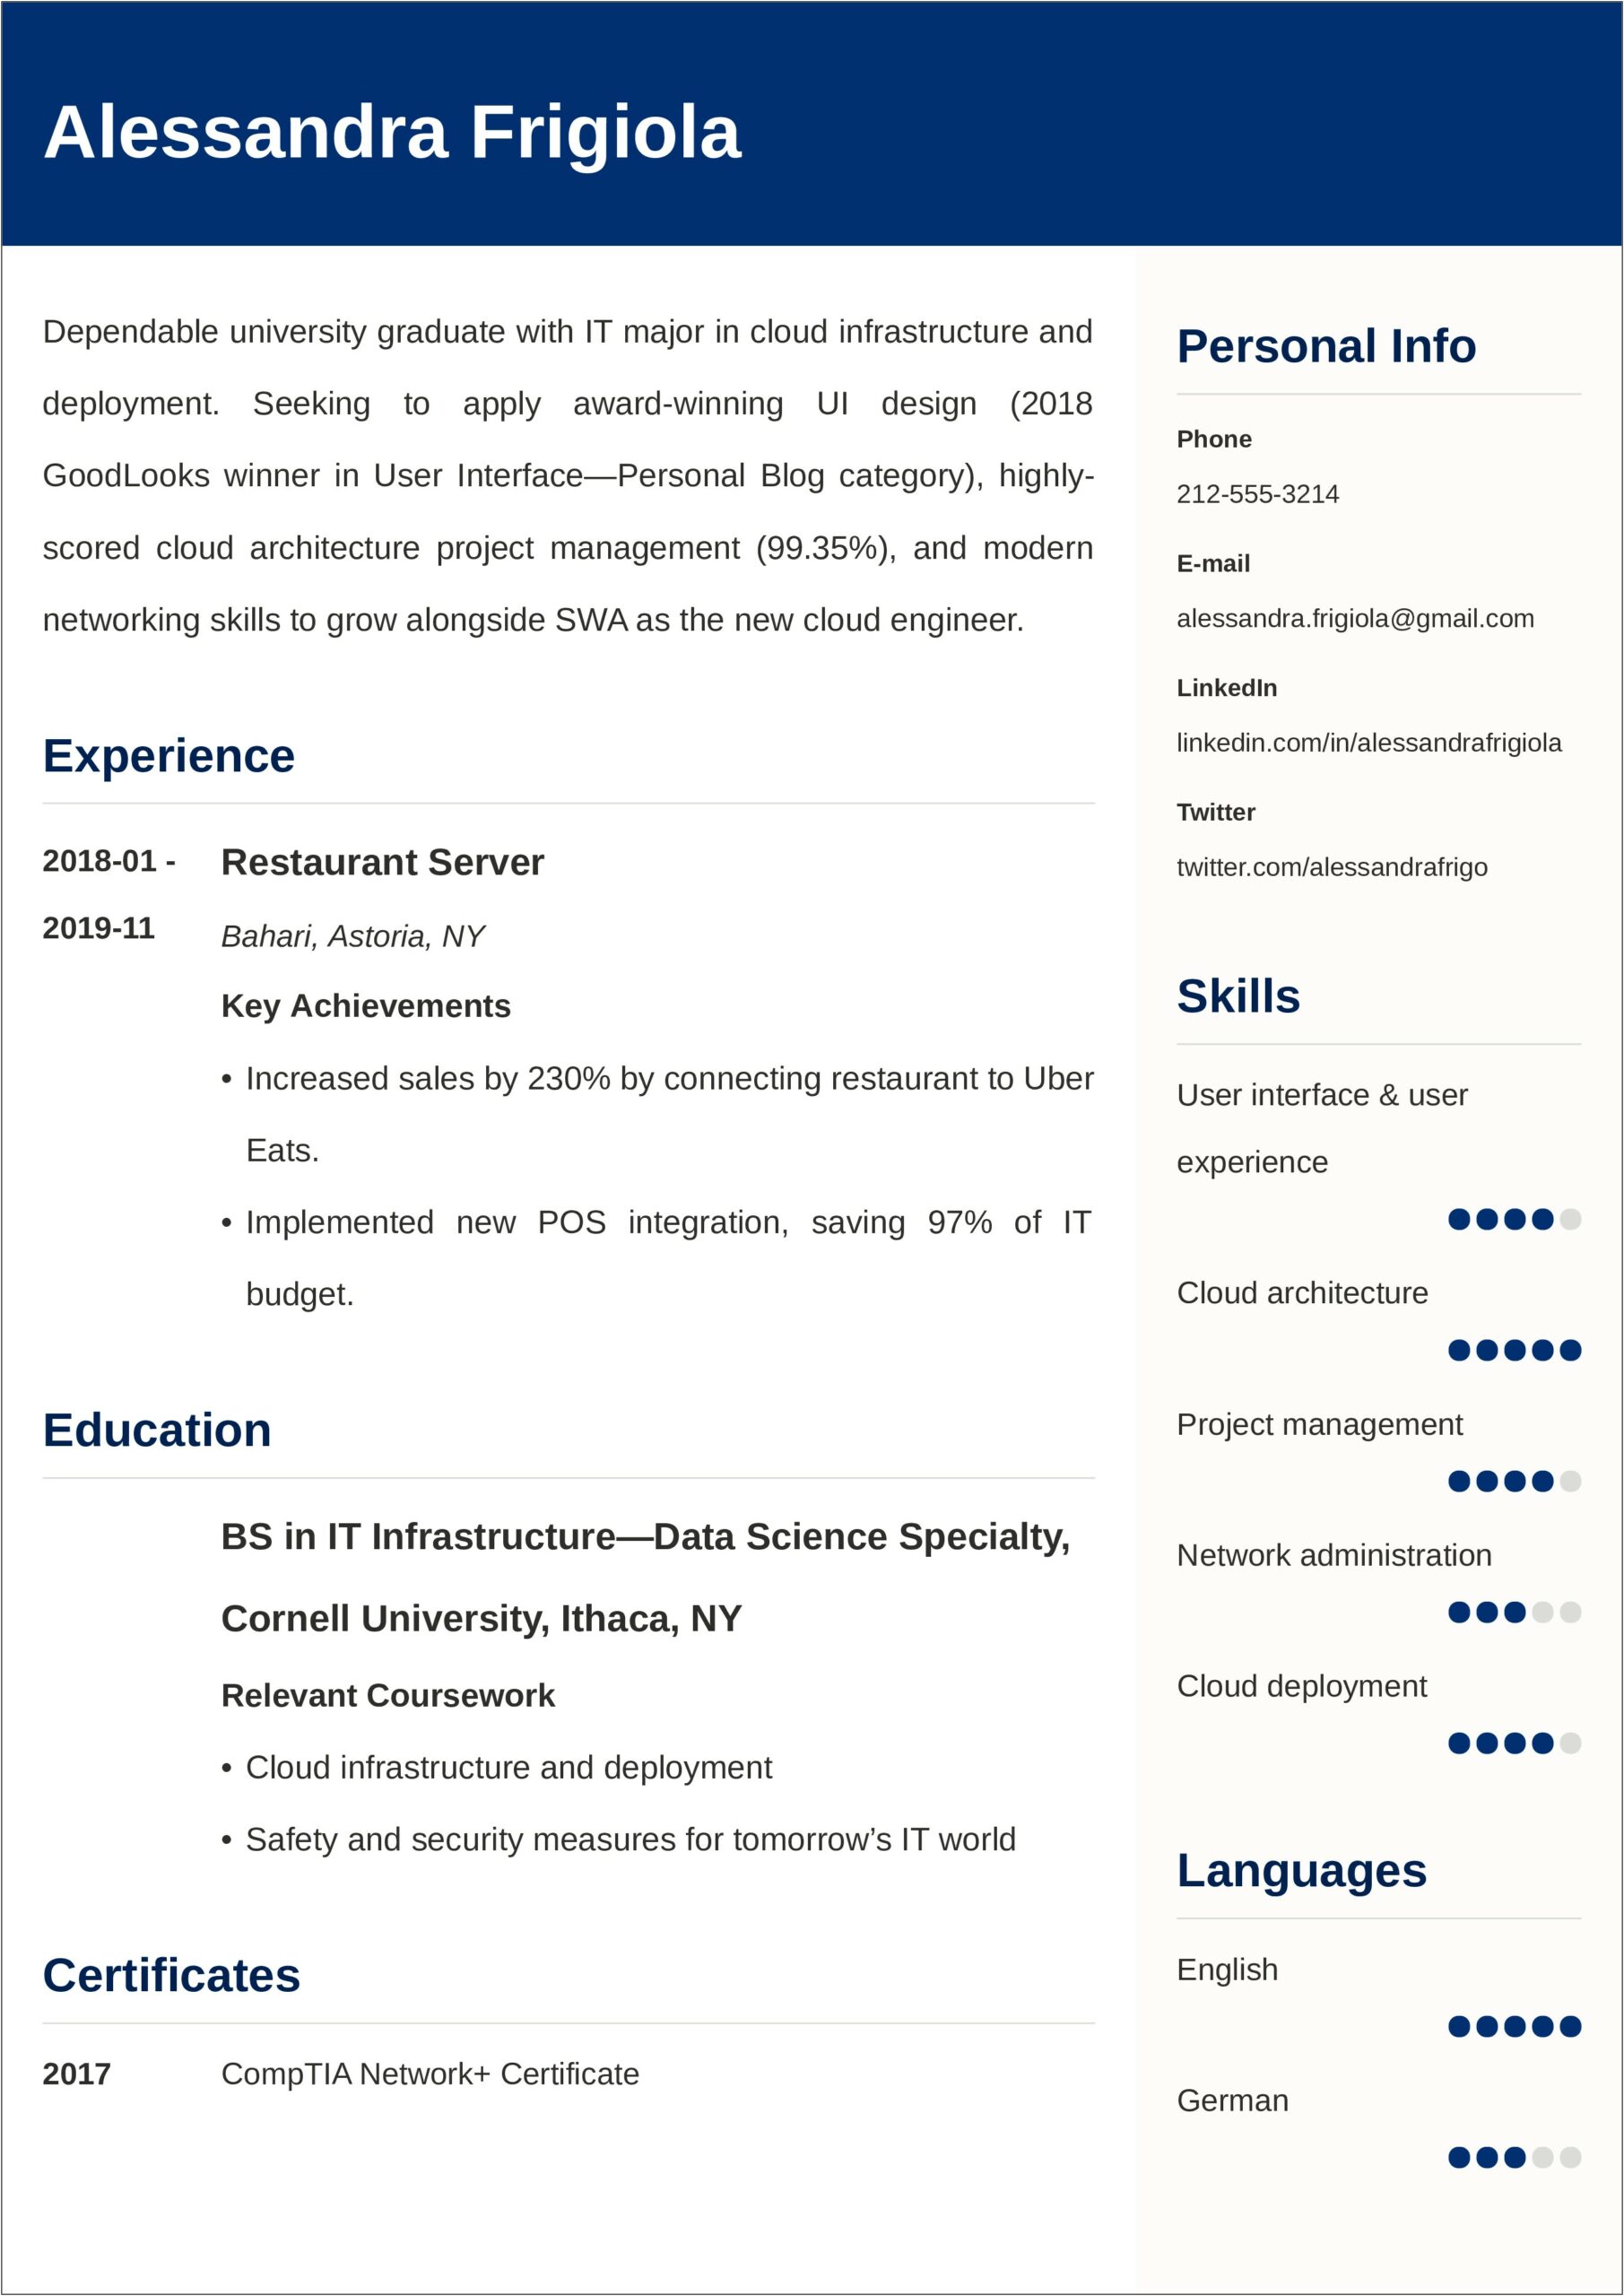 Resume Sample Love To Connect People Make Deals